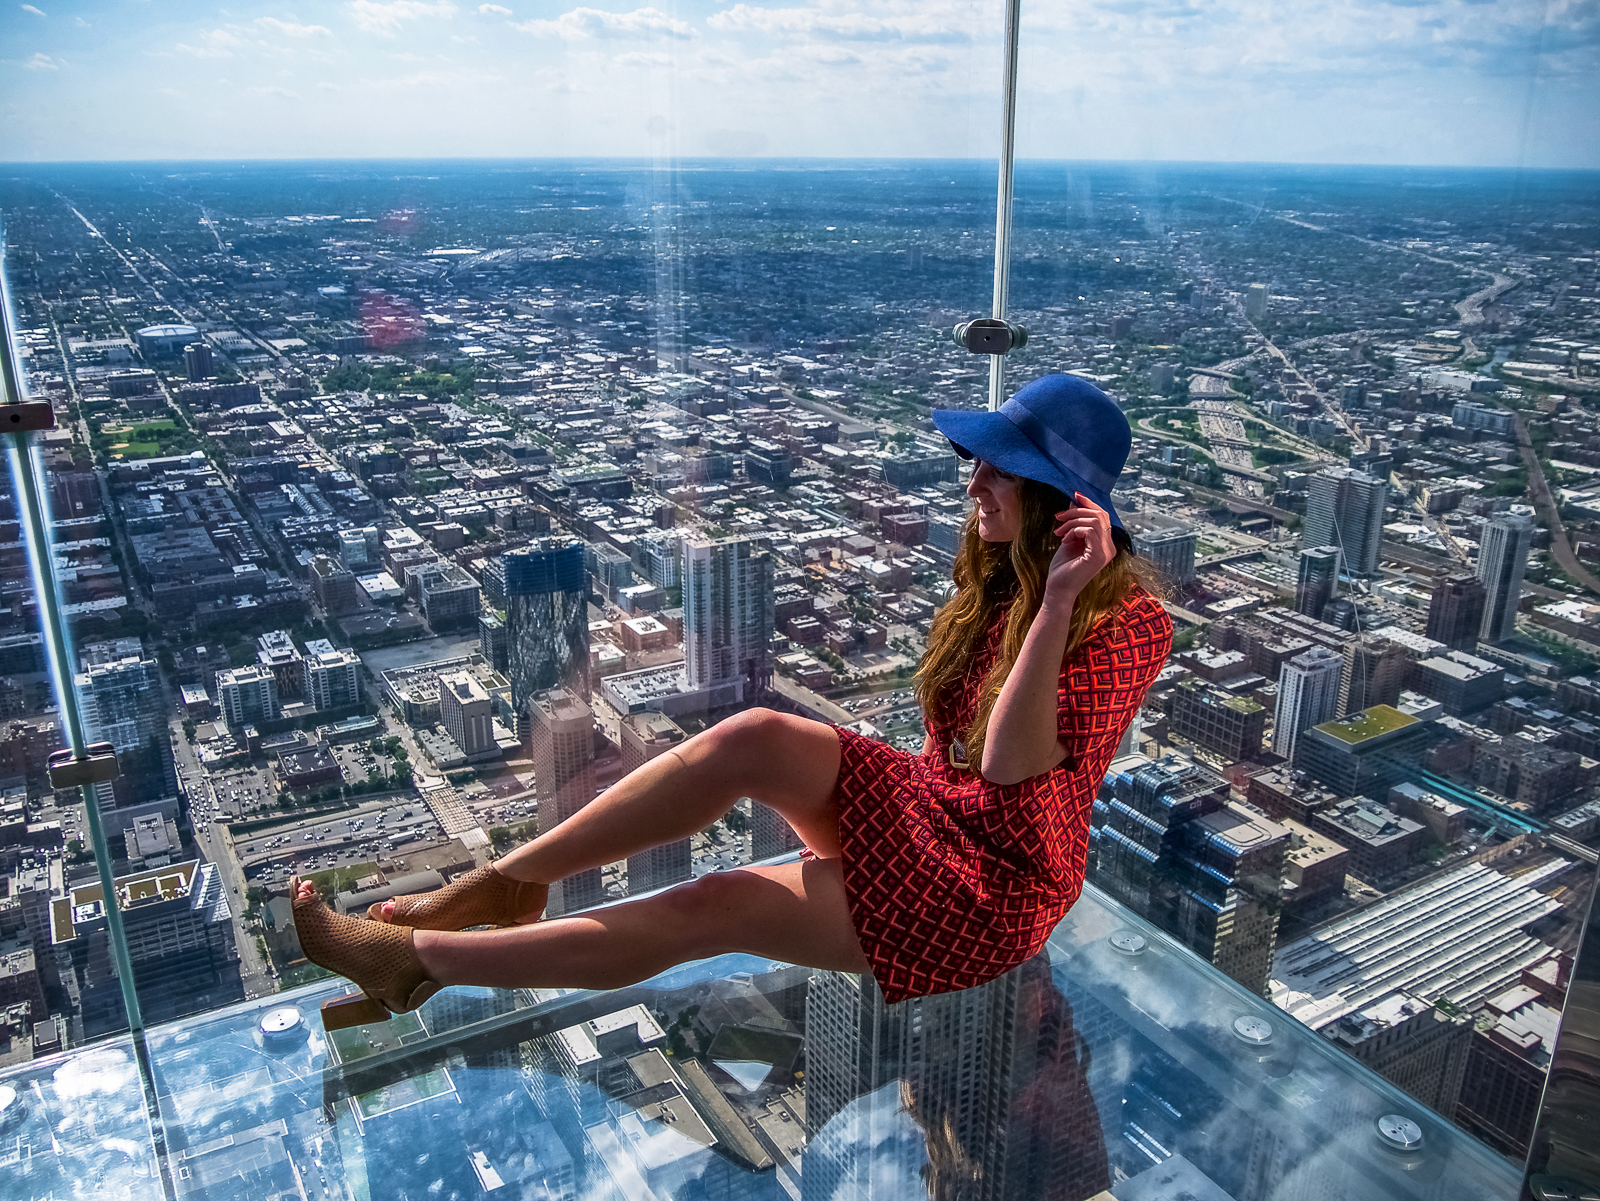 Top of the Willis Tower in Chicago